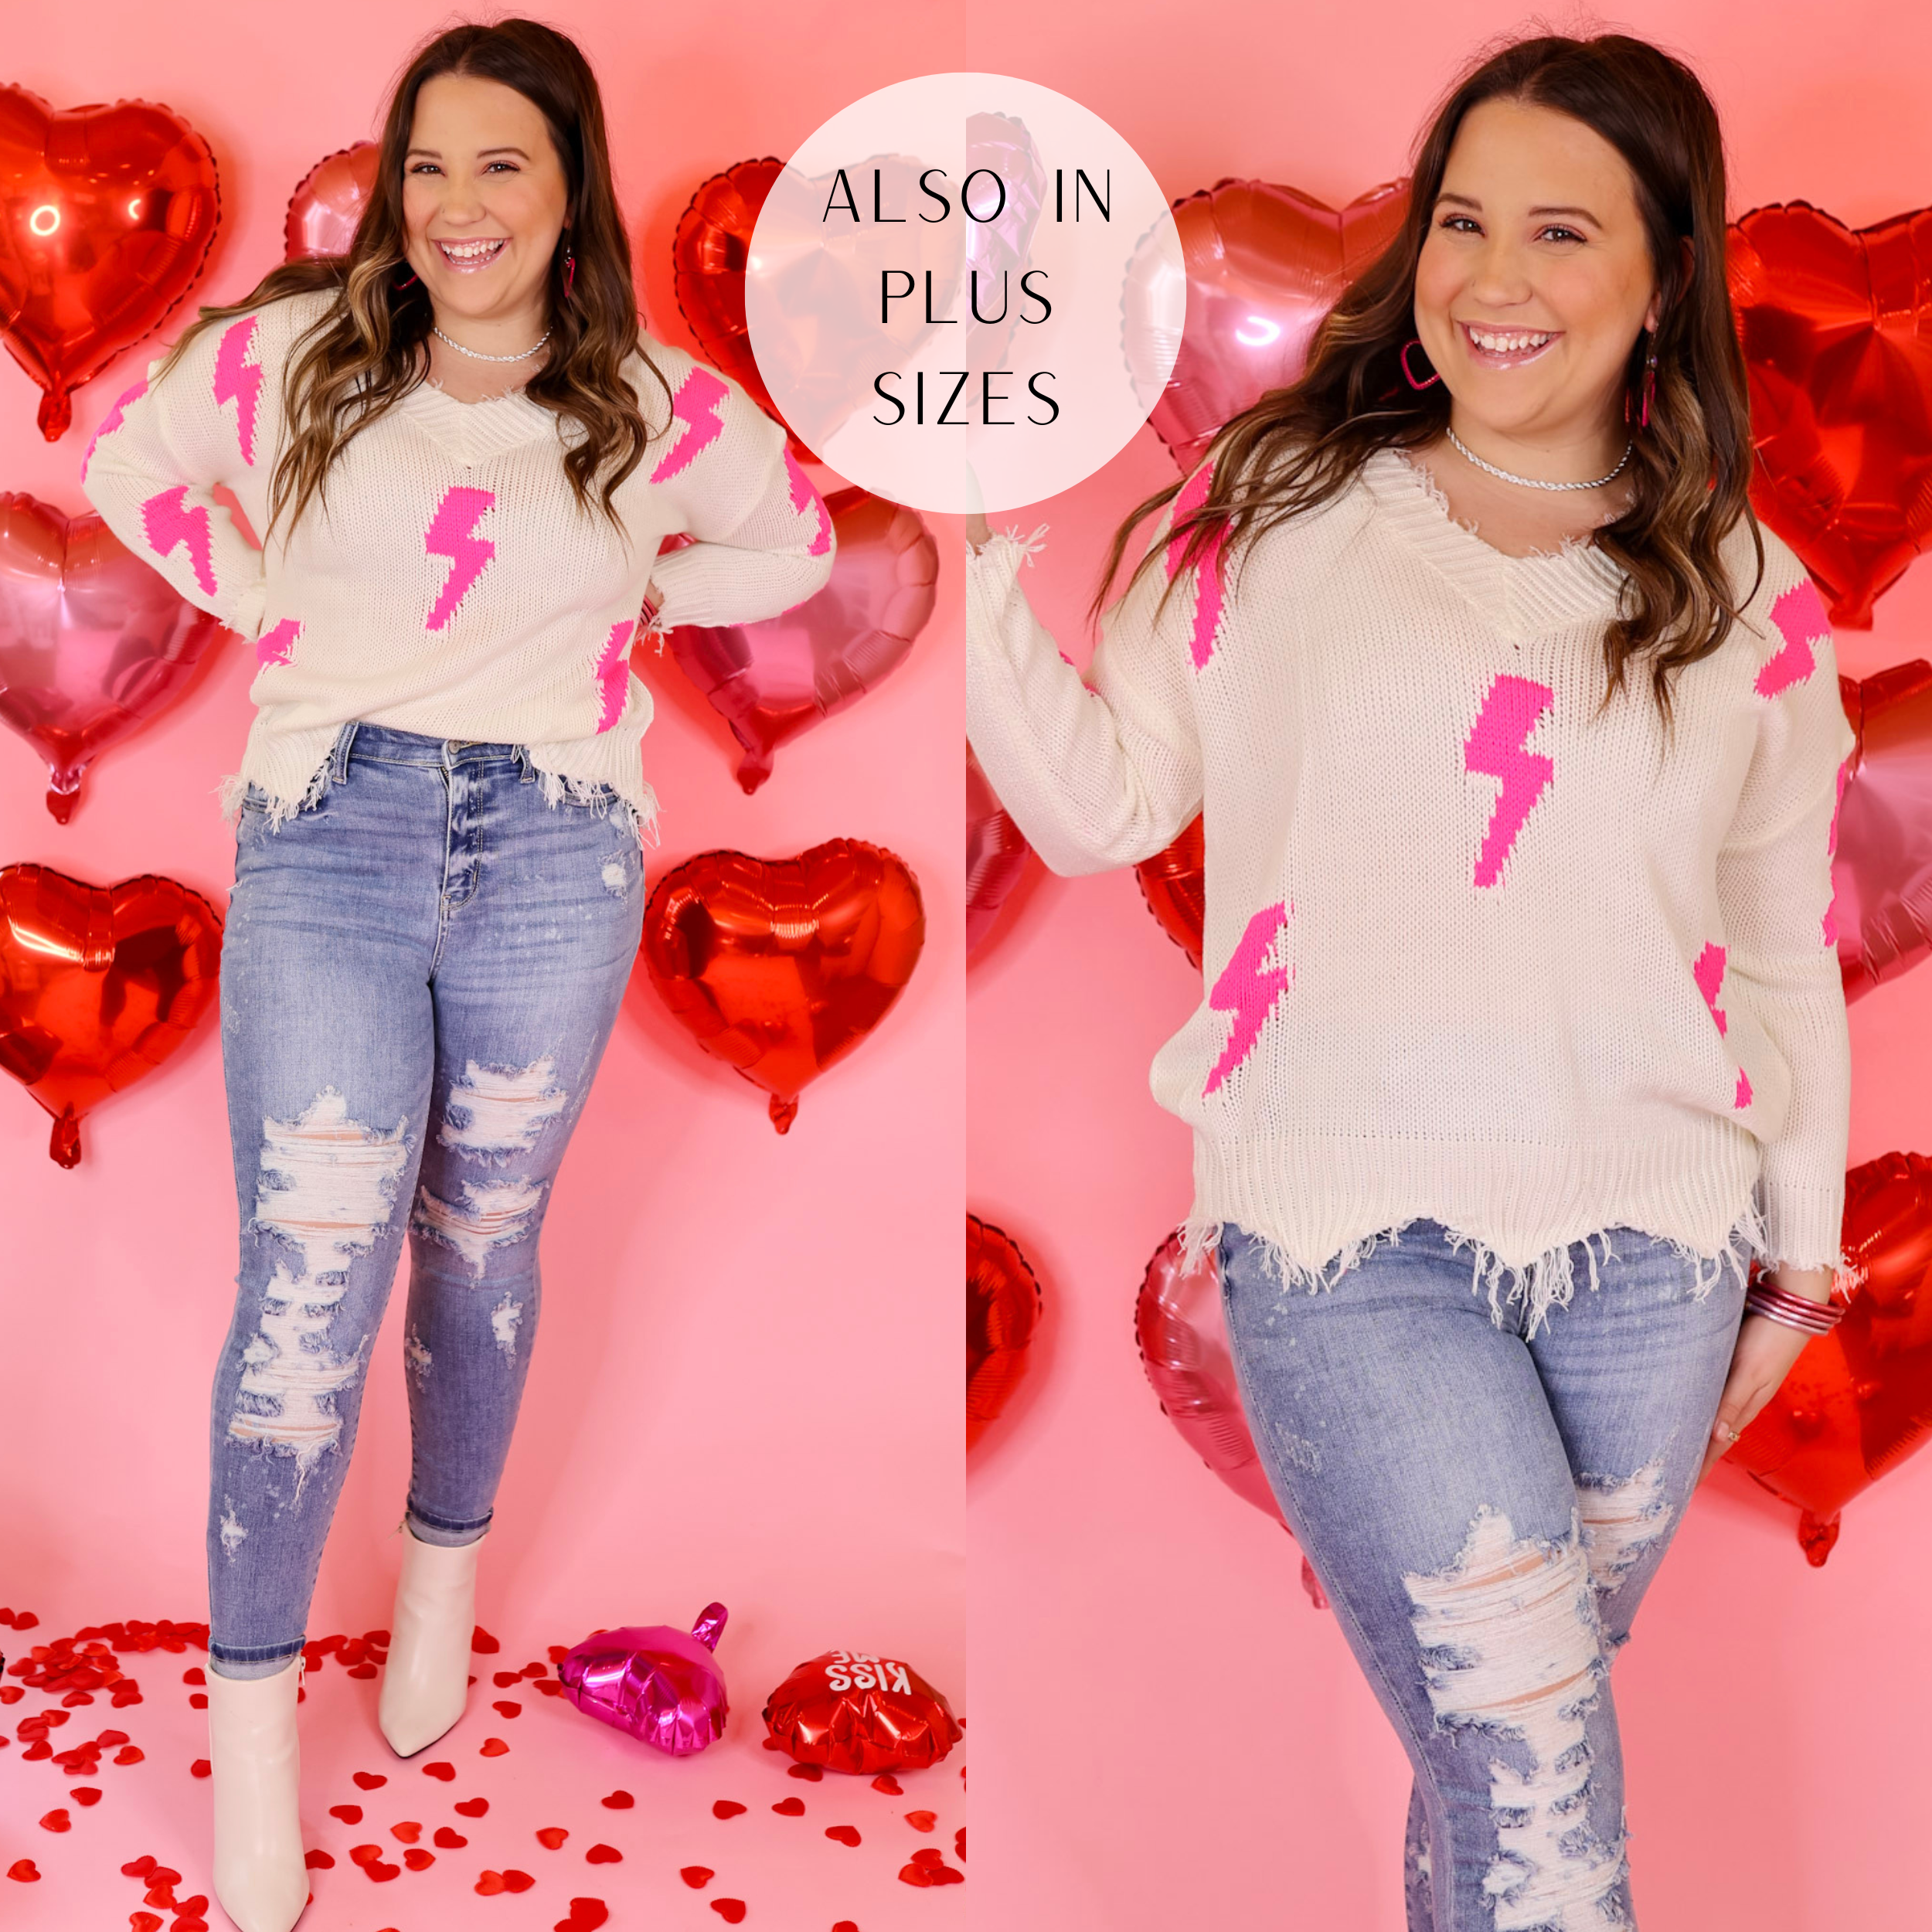 Model is wearing a v neck ivory sweater with lightning bolts in hot pink. Model has this sweater paired with skinny jeans, white booties, and silver jewelry.  Backround is light pink with red heart balloons. 